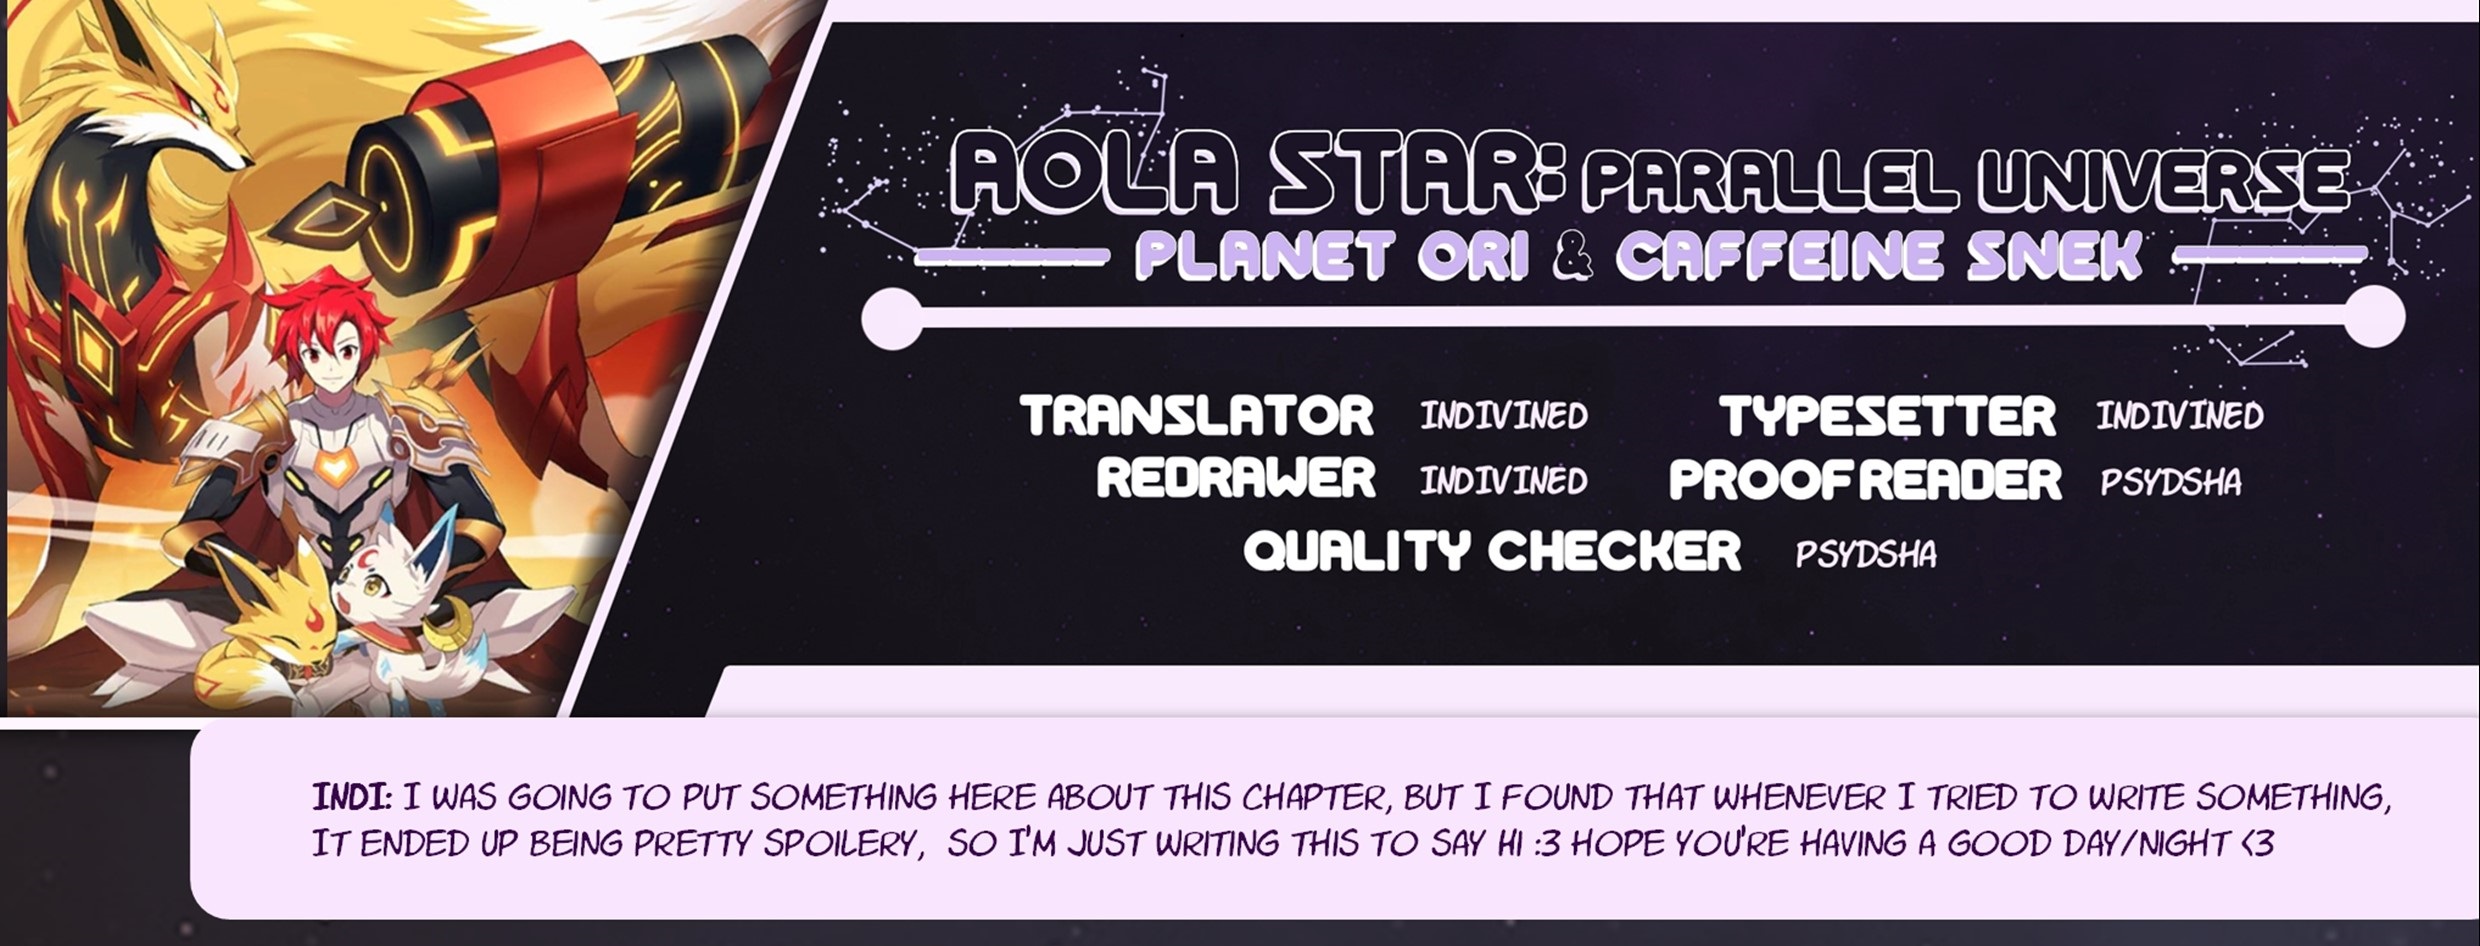 Aola Star - Parallel Universe - 55 page 16